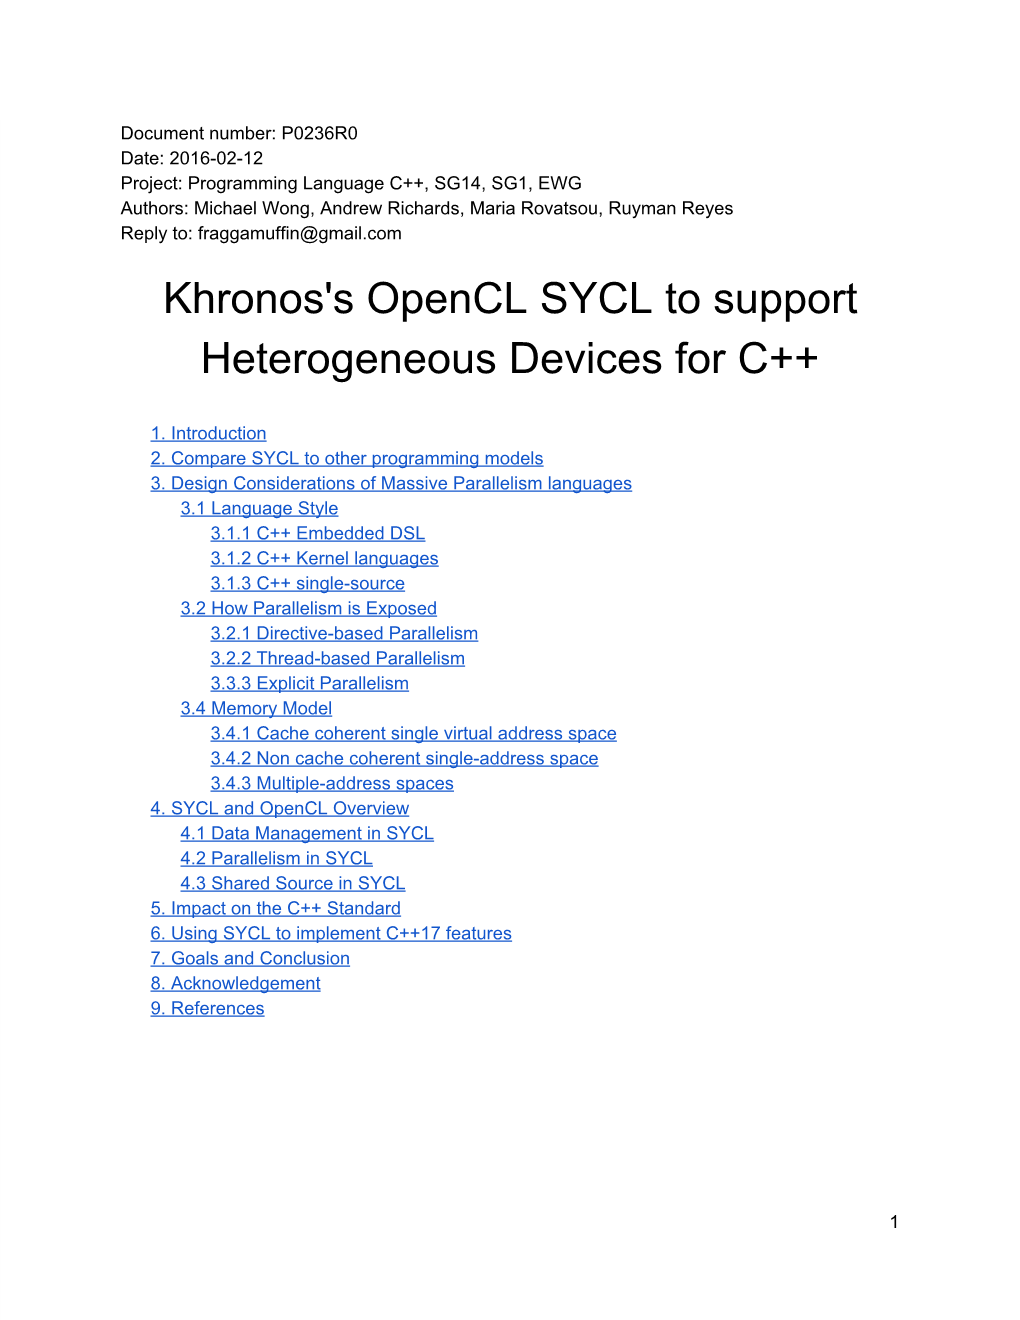 Khronos's Opencl SYCL to Support Heterogeneous Devices for C++